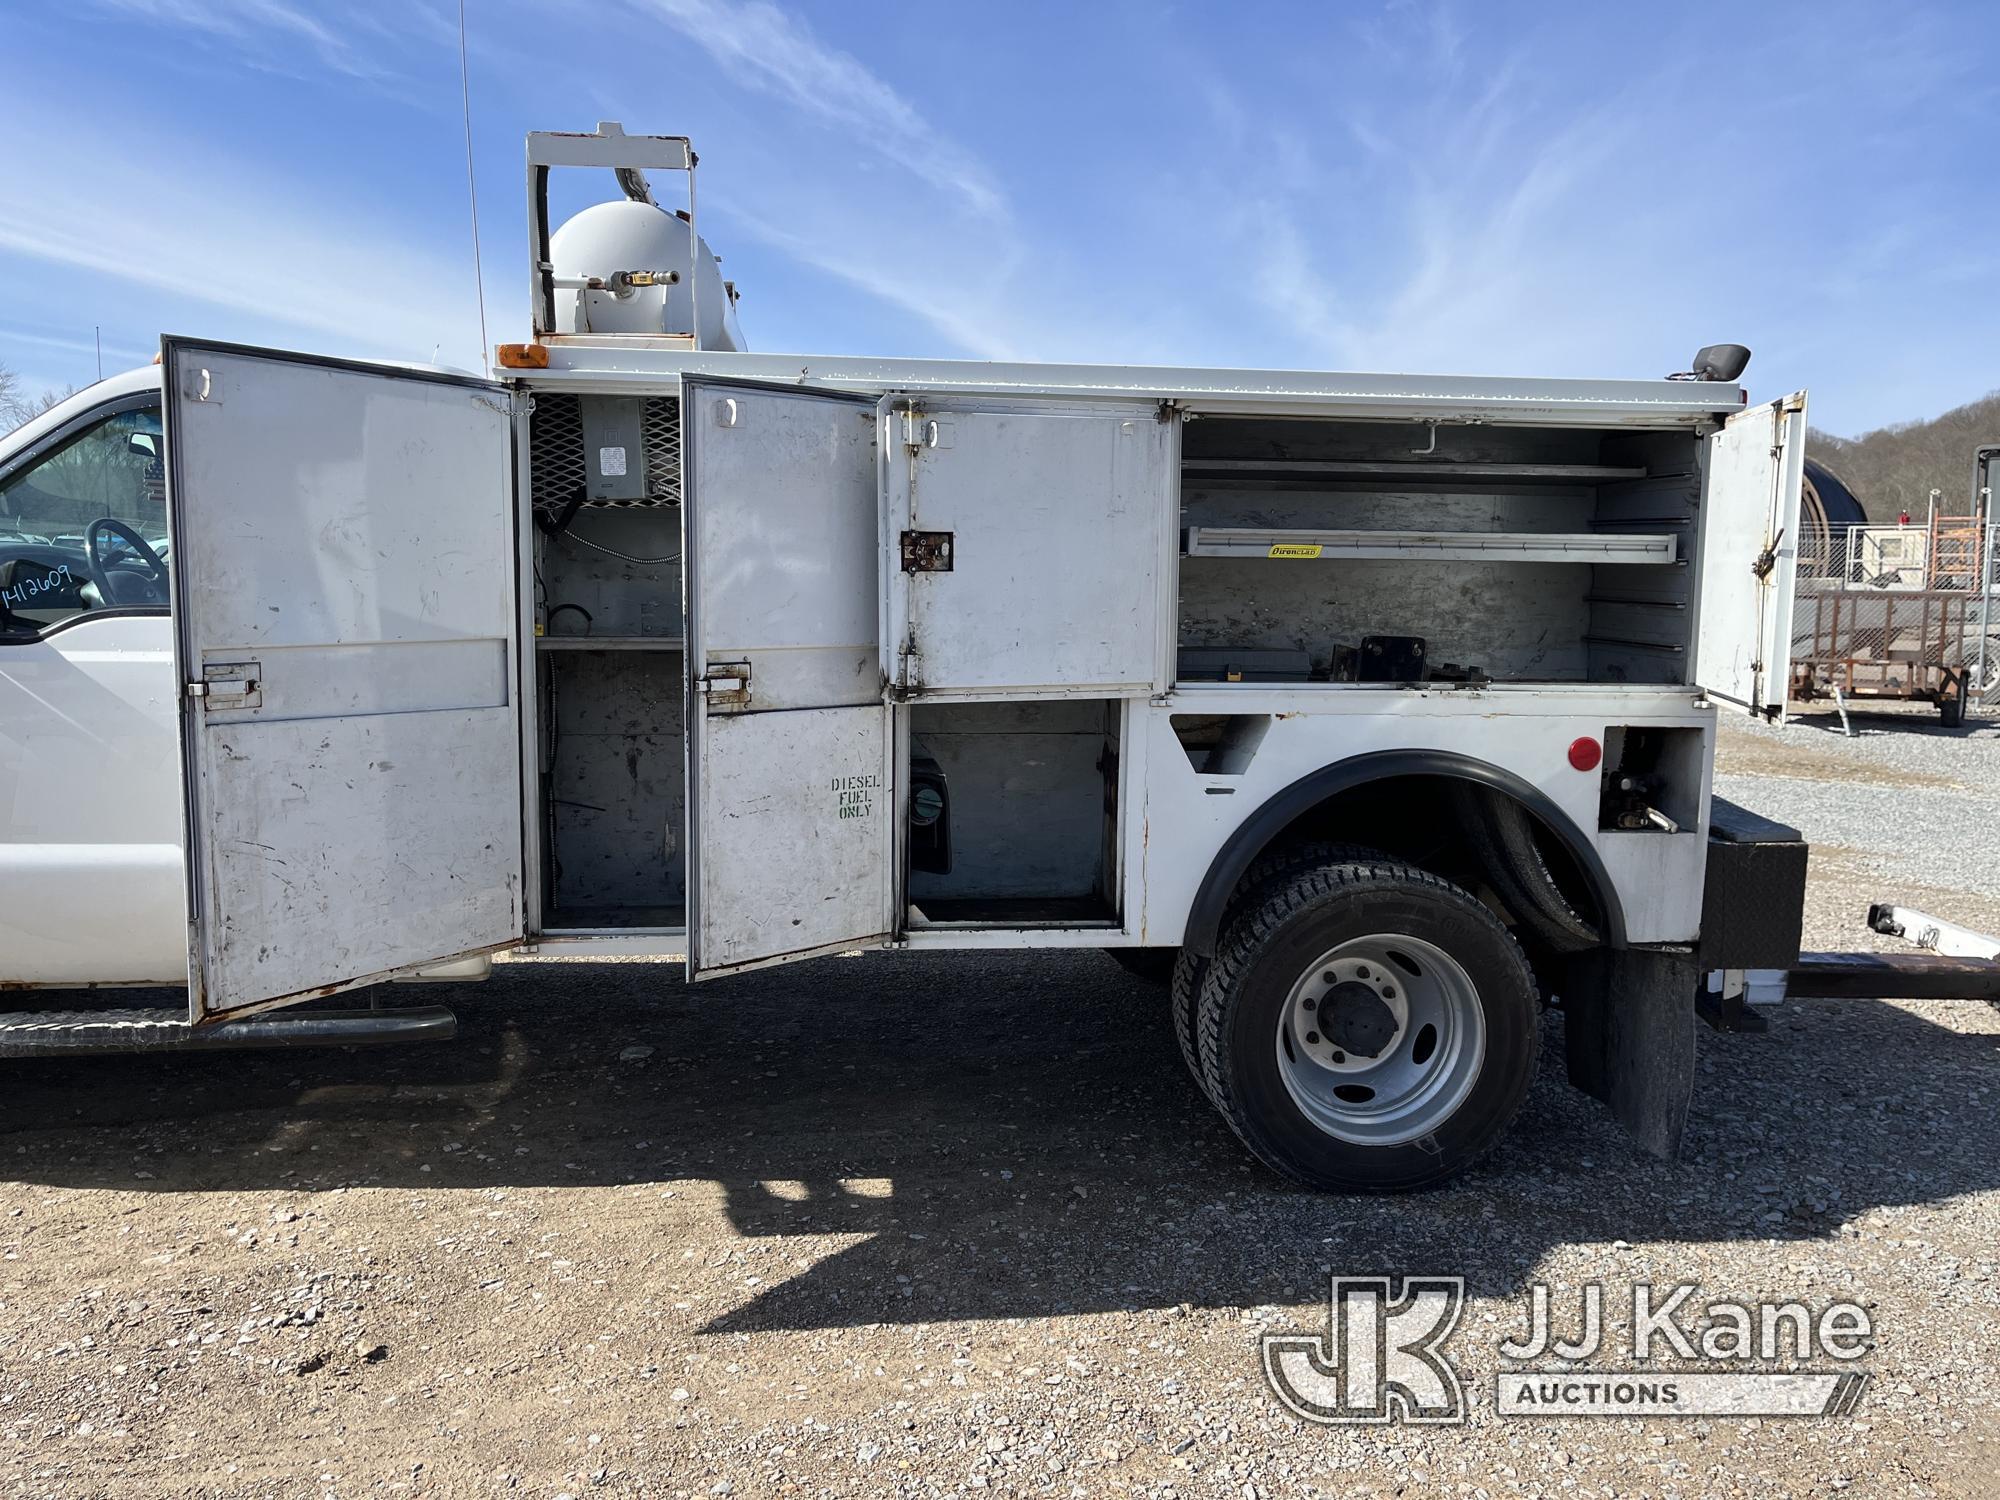 (Smock, PA) 1999 Ford F550 4x4 Tow Truck Runs, Moves & Operates, Rust Damage